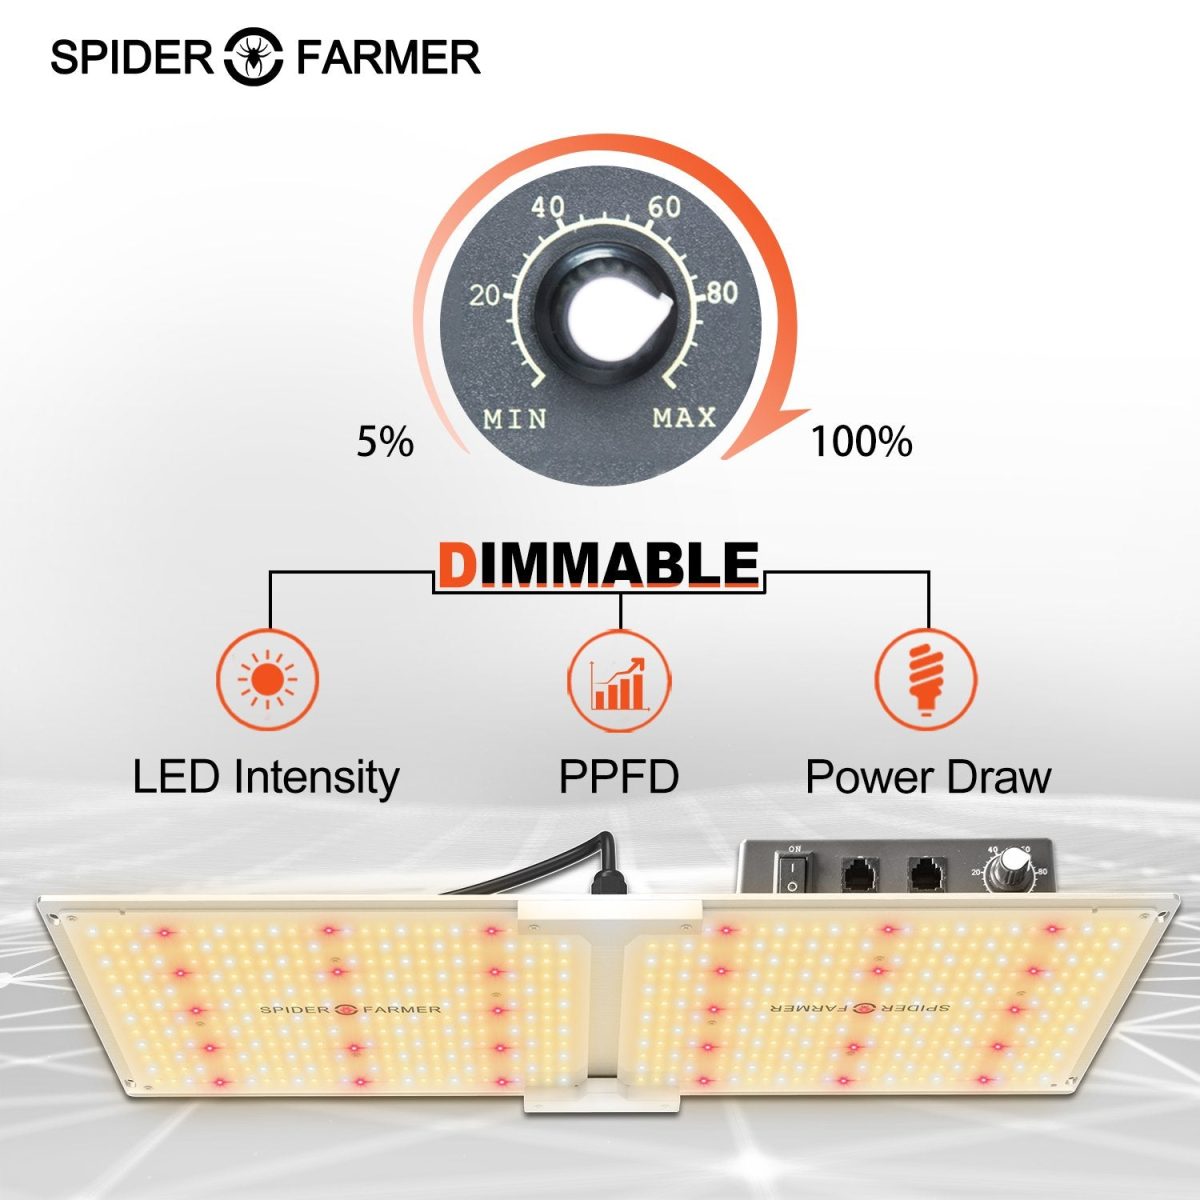 Features of SF2000 LED